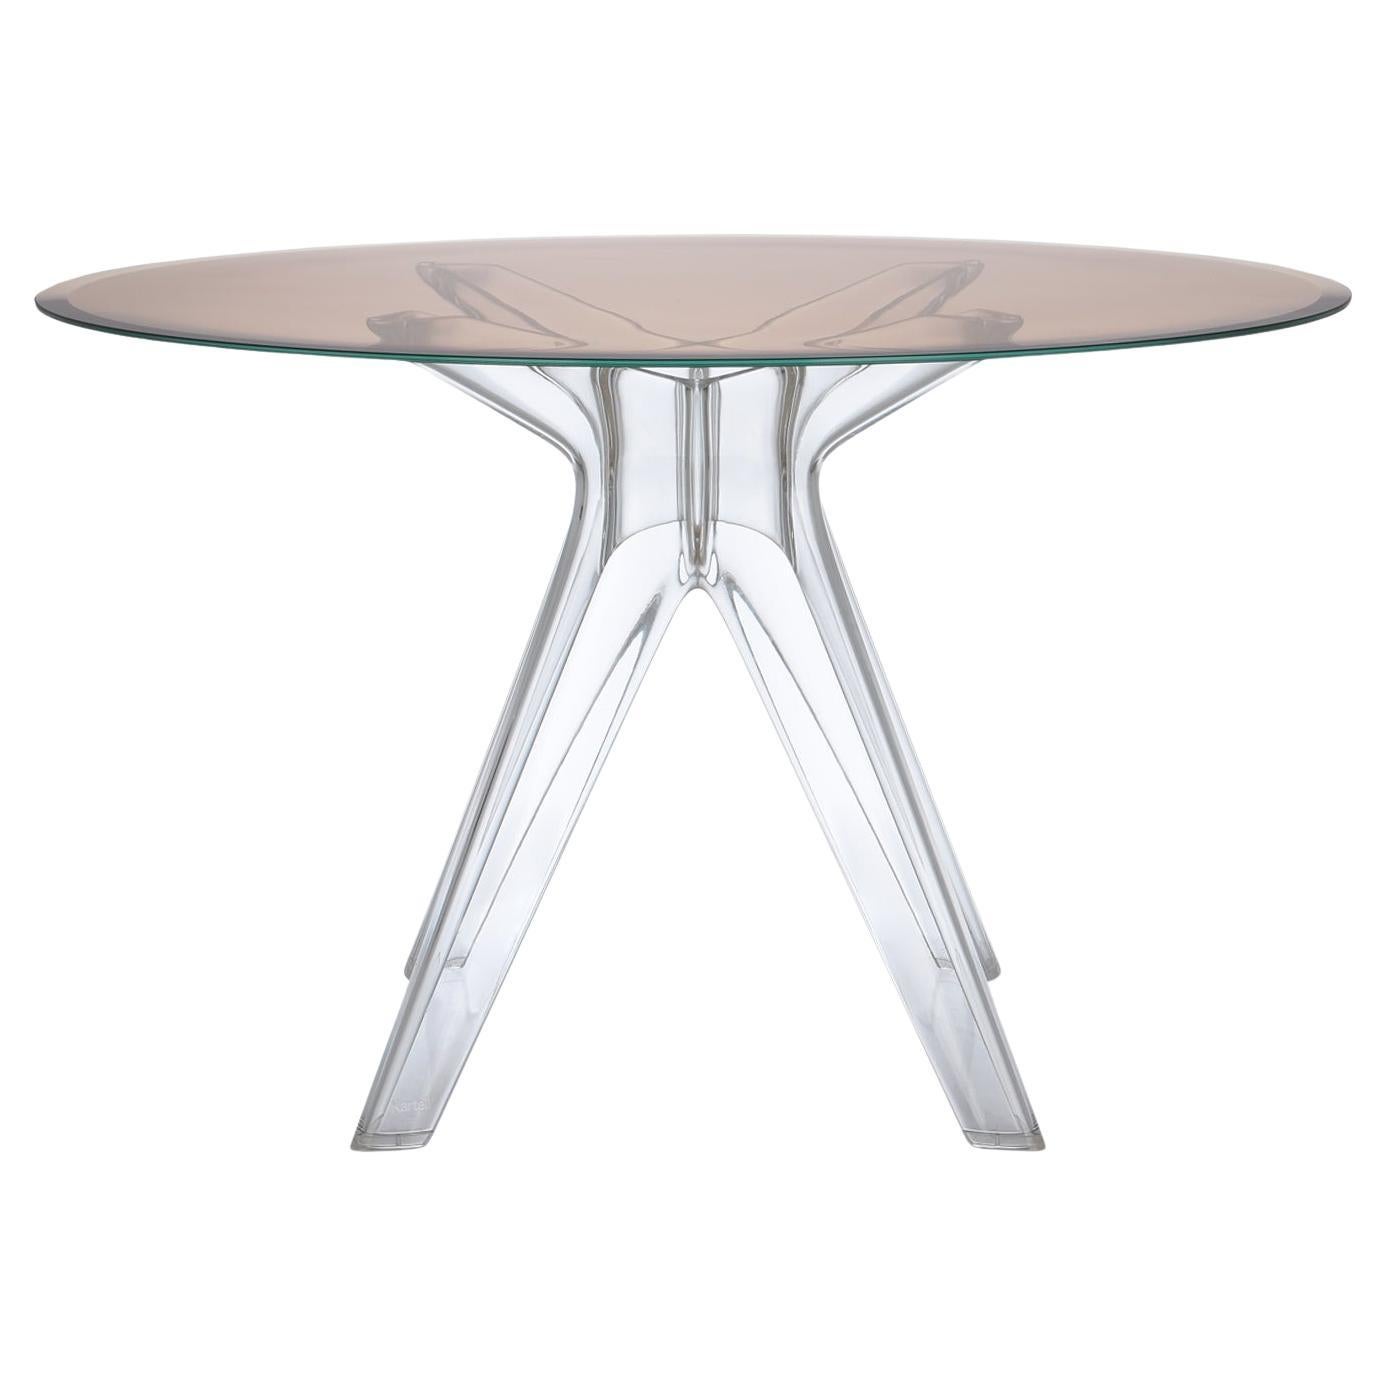 Table basse ronde Sir Gio avec plateau rose de Philippe Starck pour Kartell